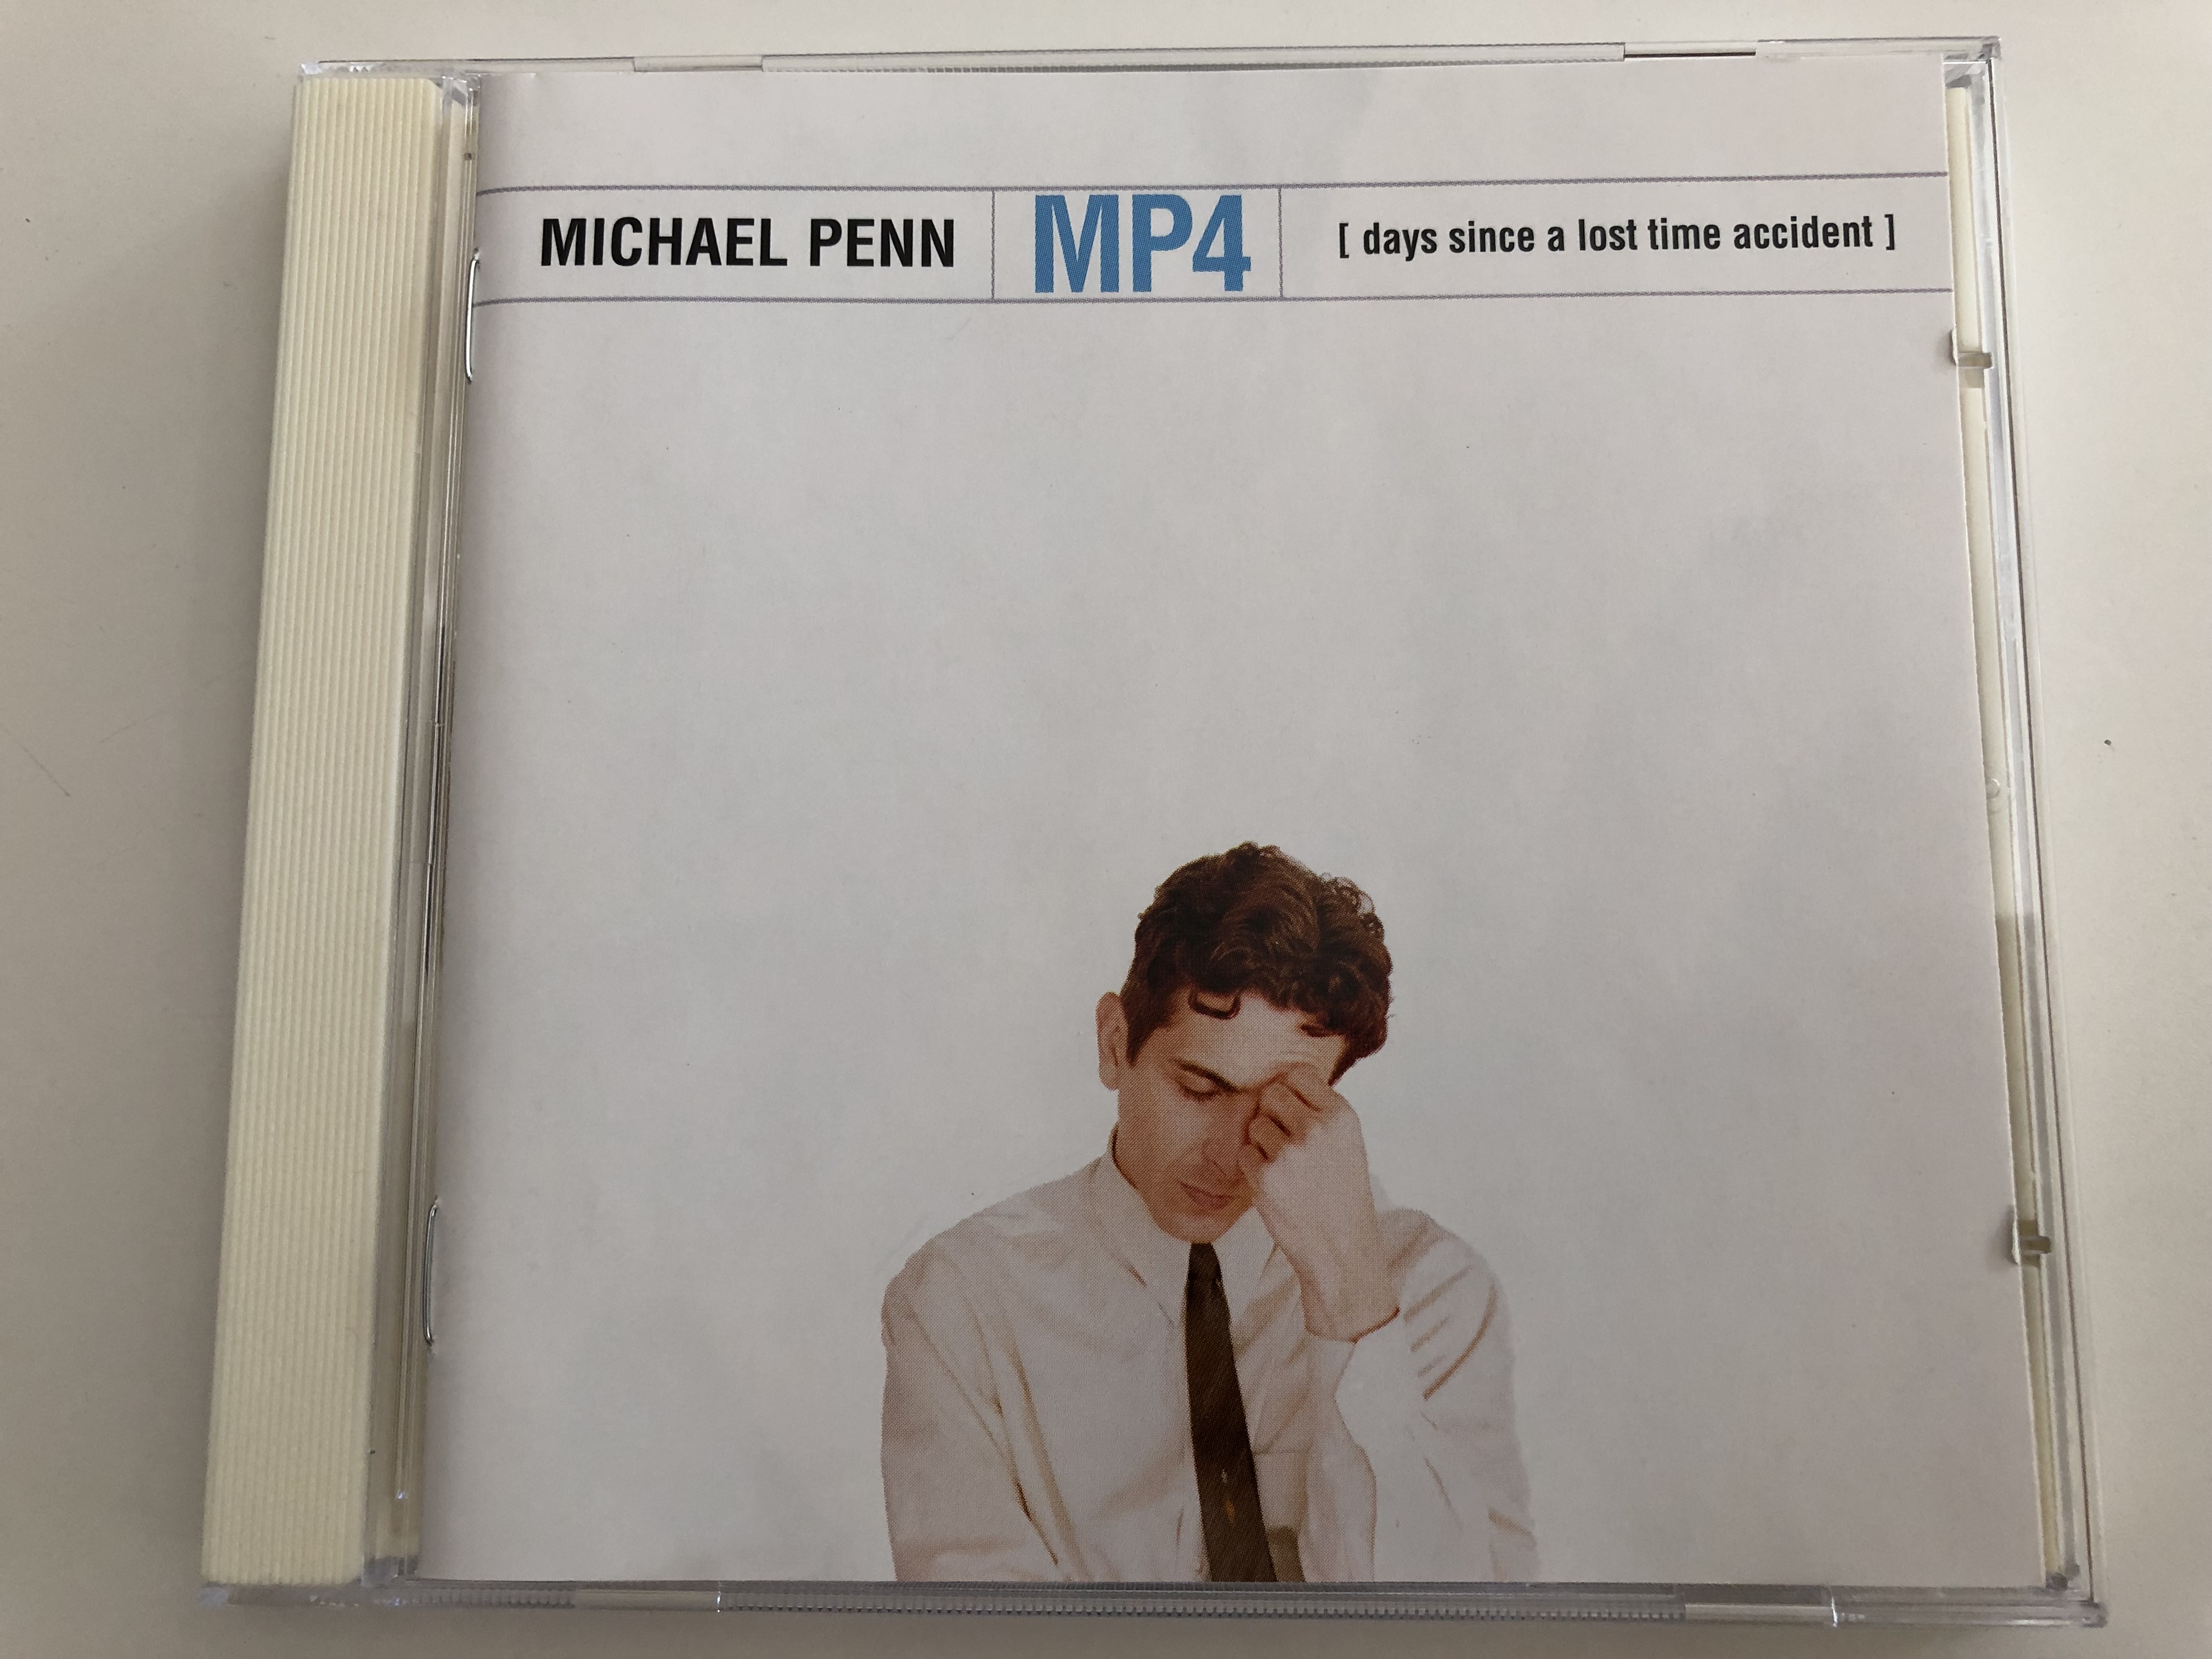 michael-penn-days-since-a-lost-time-accident-audio-cd-2000-mp4-epic-records-epc-4948072-1-.jpg